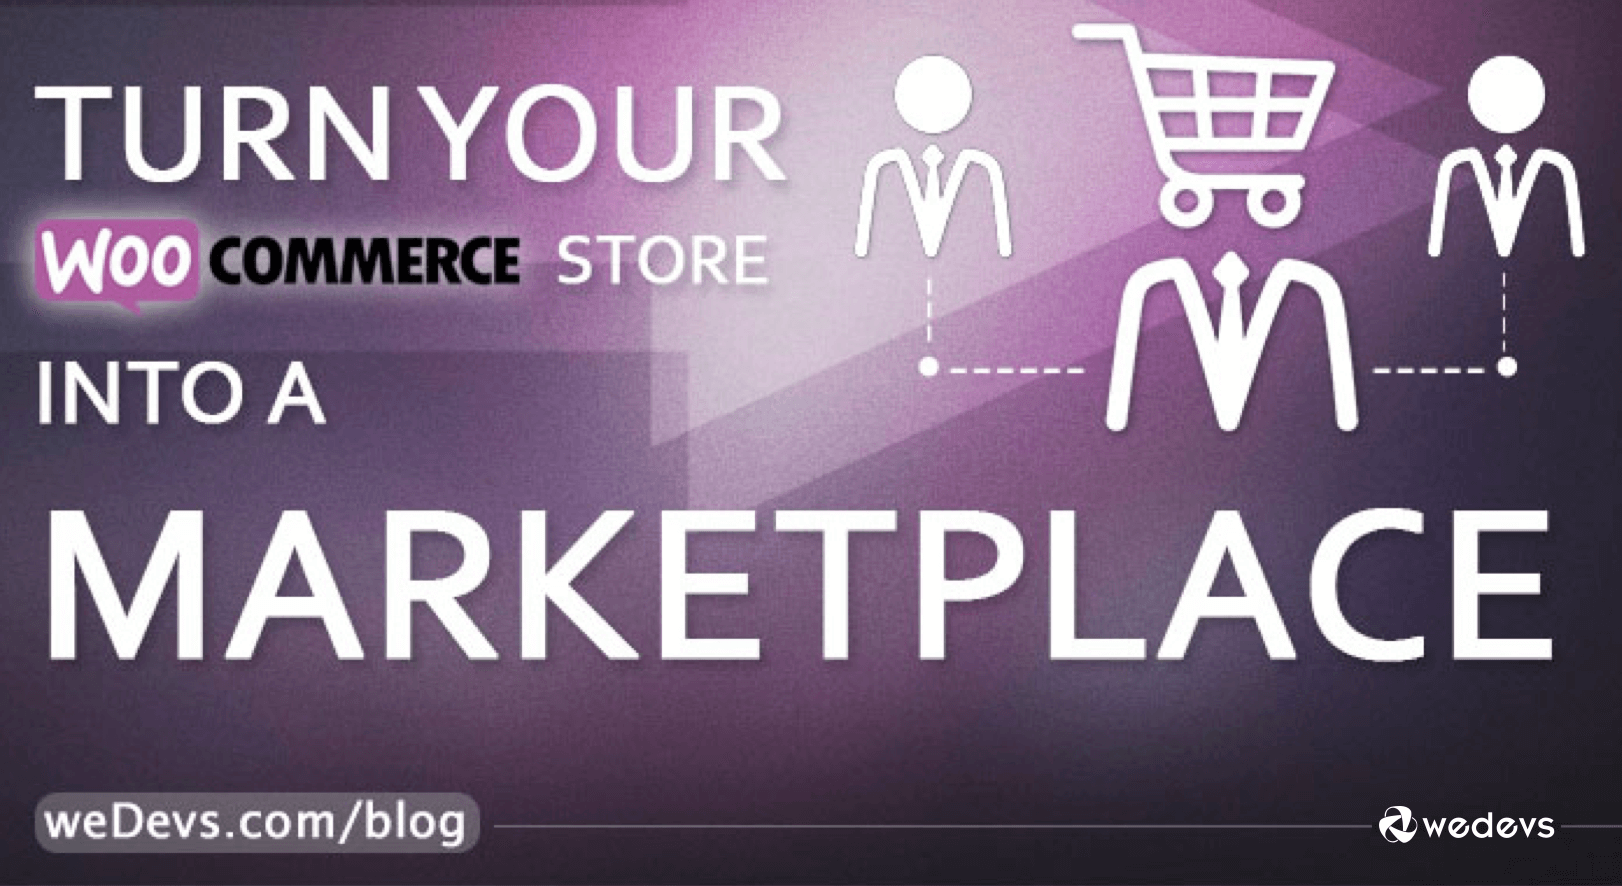 Turn your WooCommerce store into a Marketplace